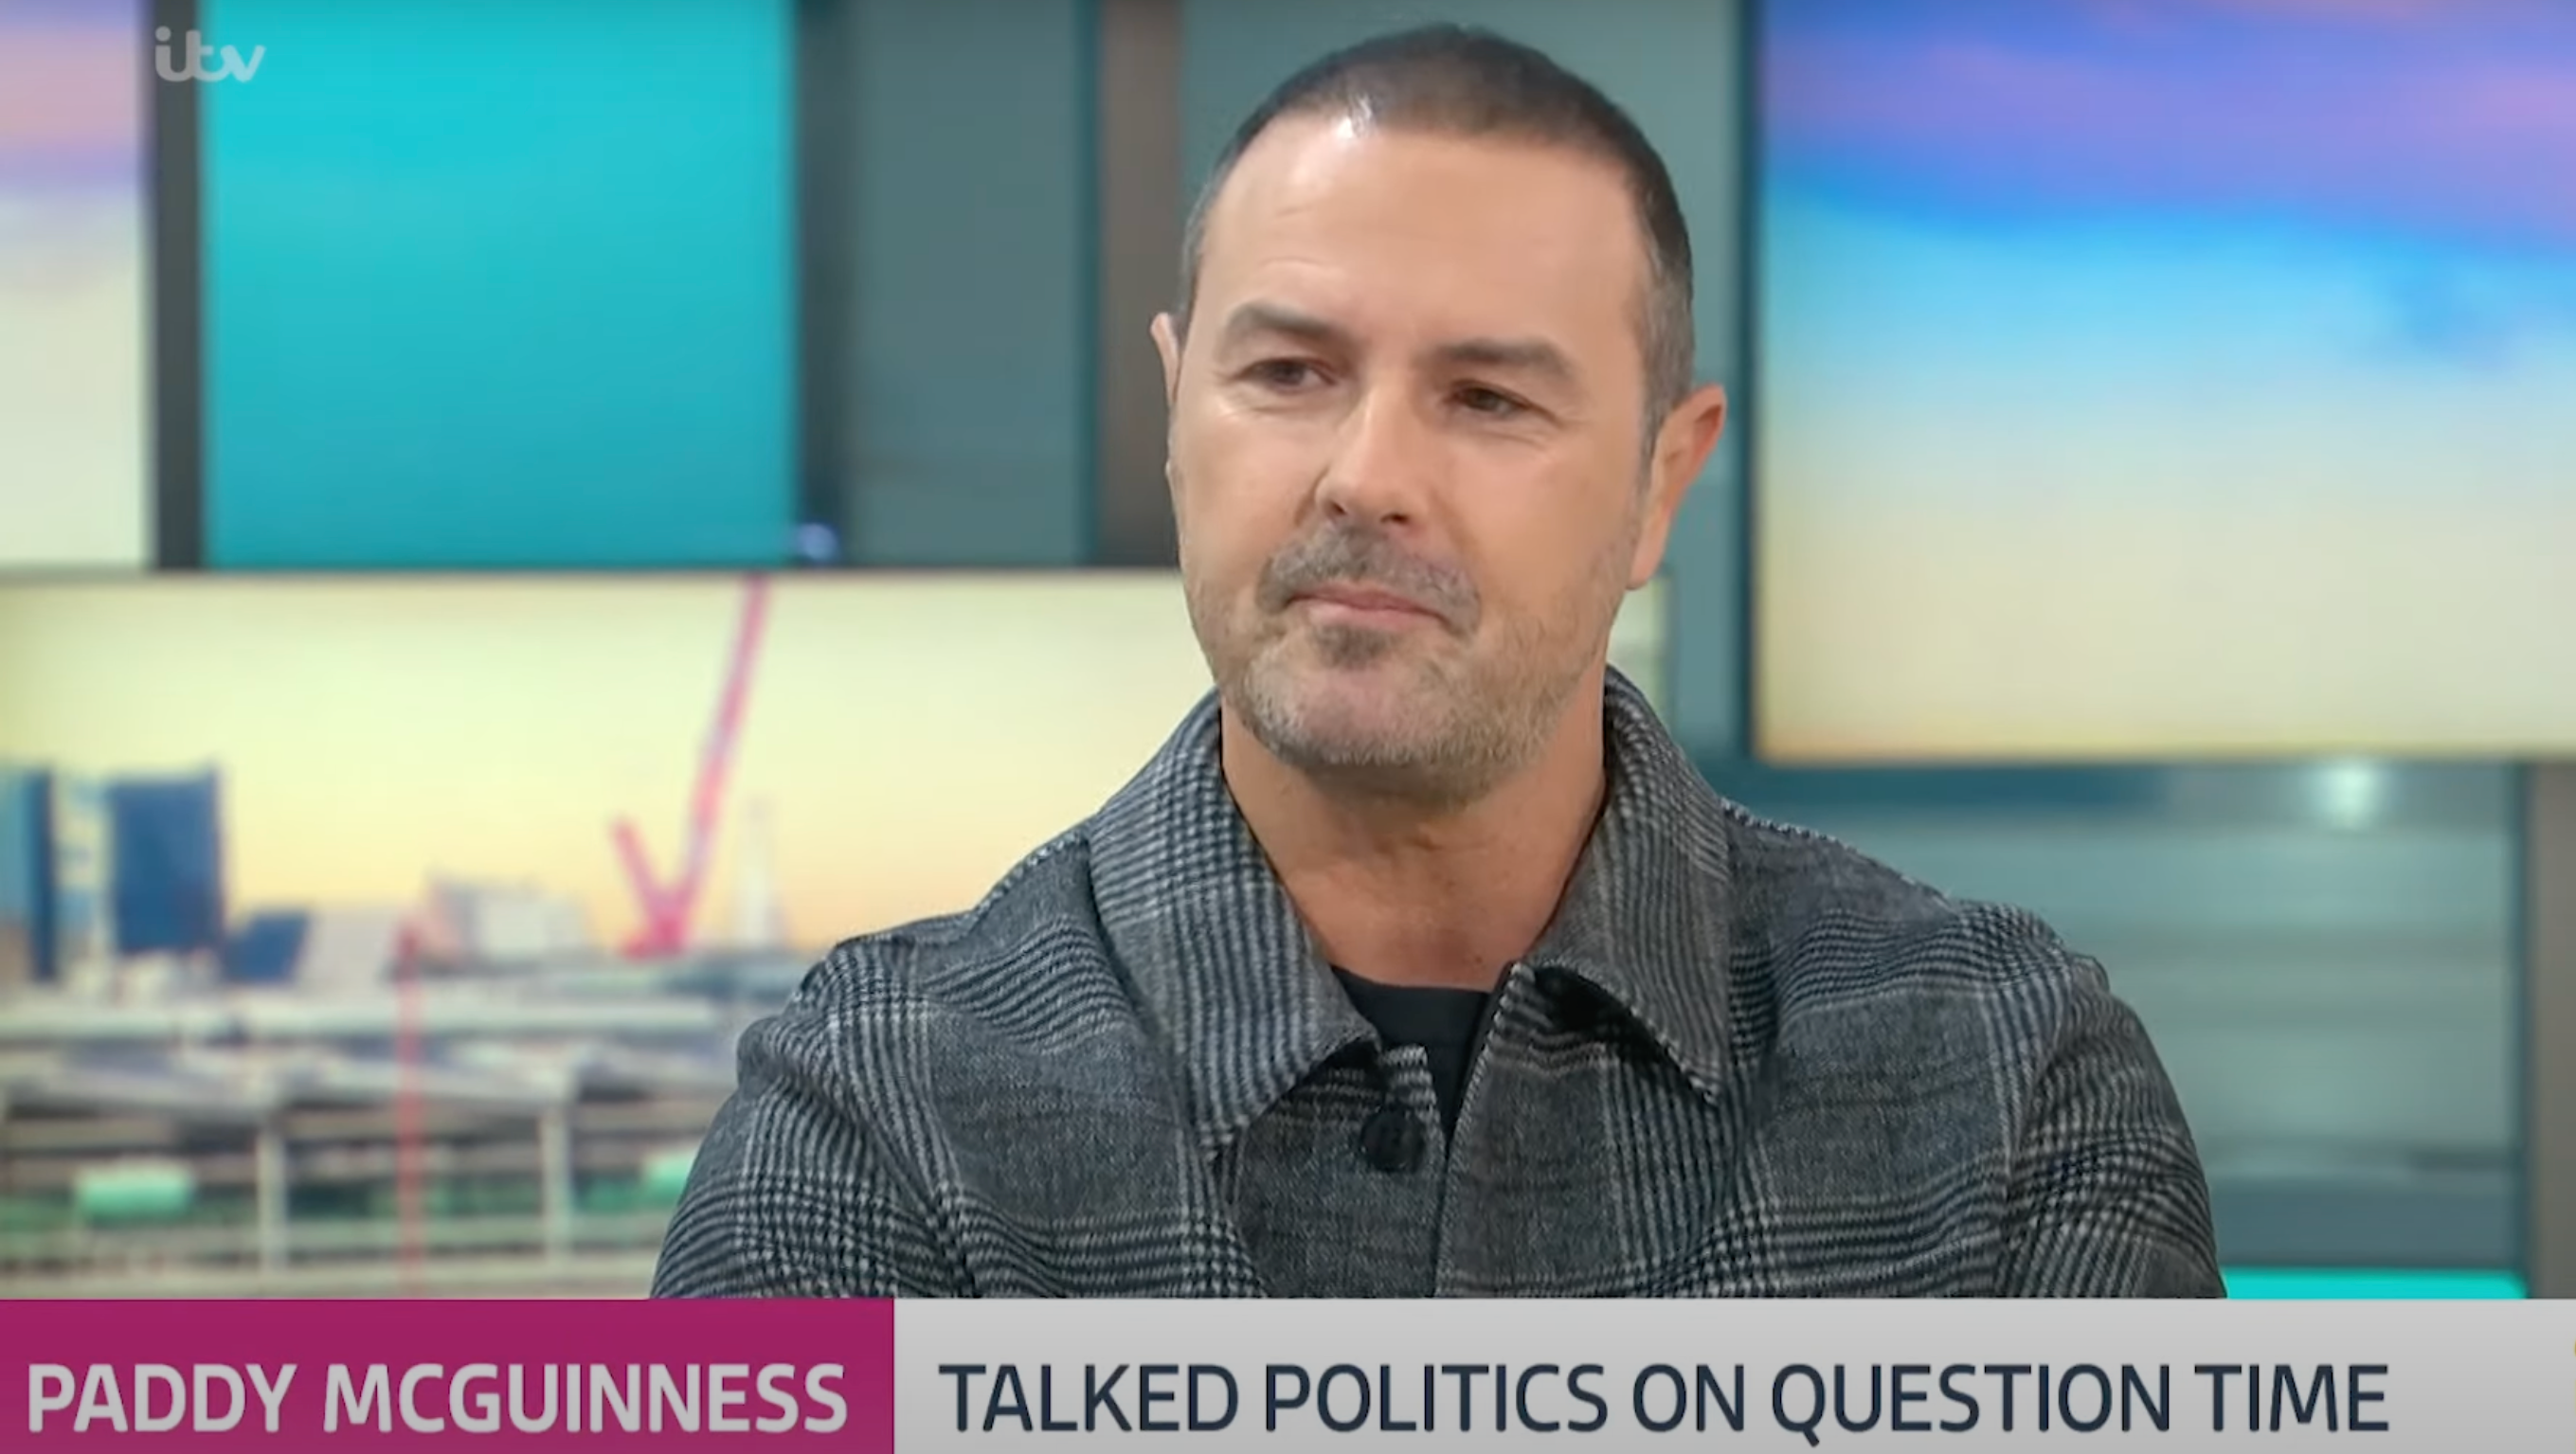 Paddy McGuinness said it was “important” to have “everyone’s voice” on the programme